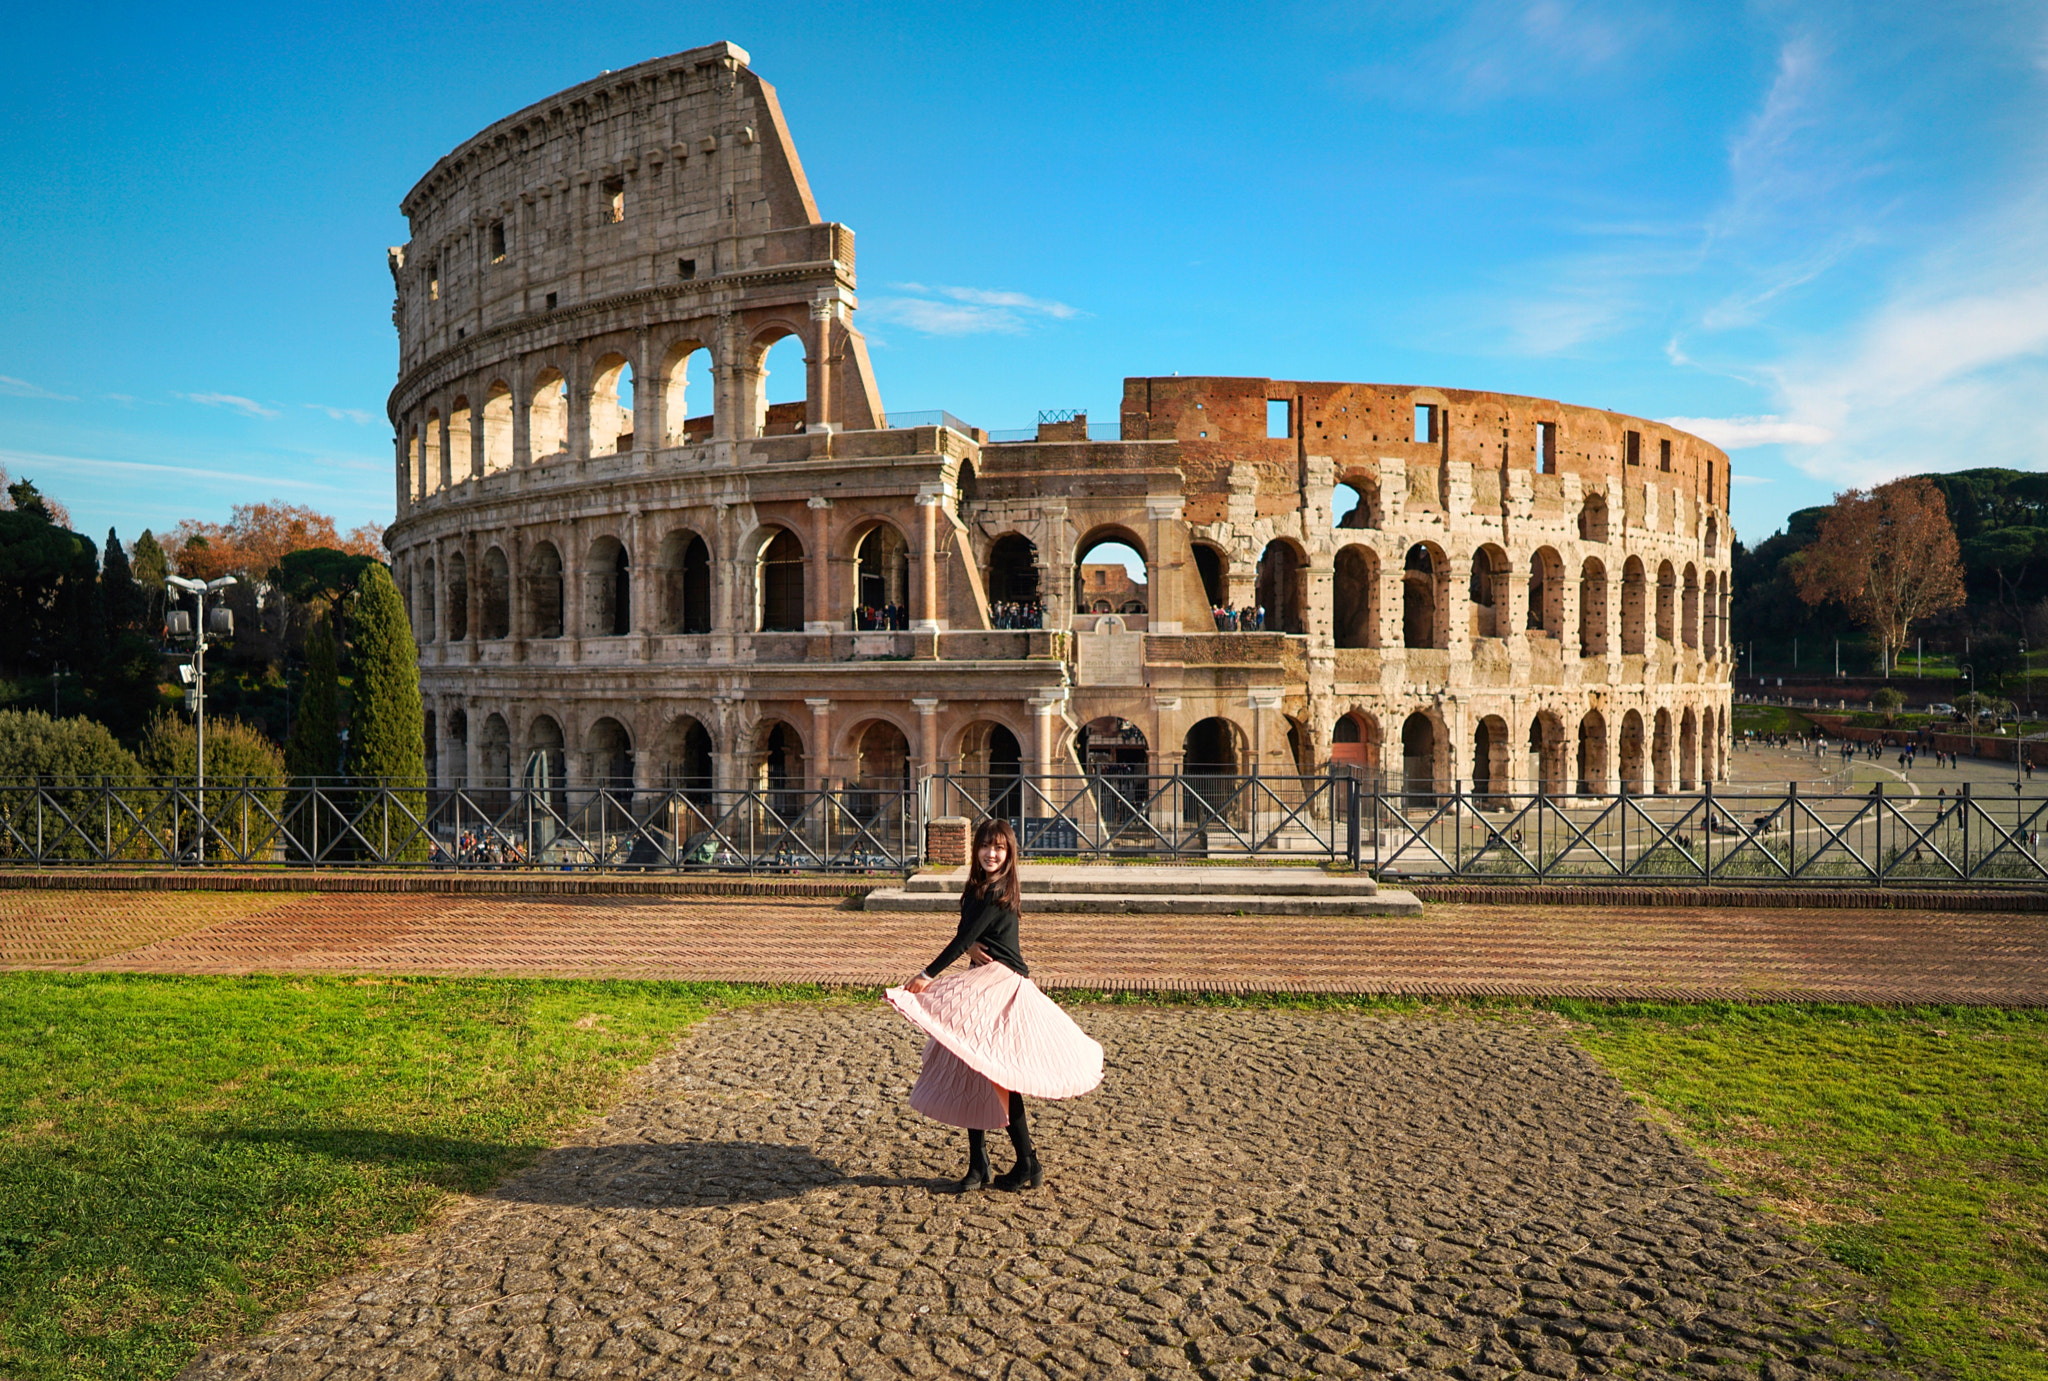 Sony a7R II sample photo. Think back the nice memories of colosseum in rome. photography